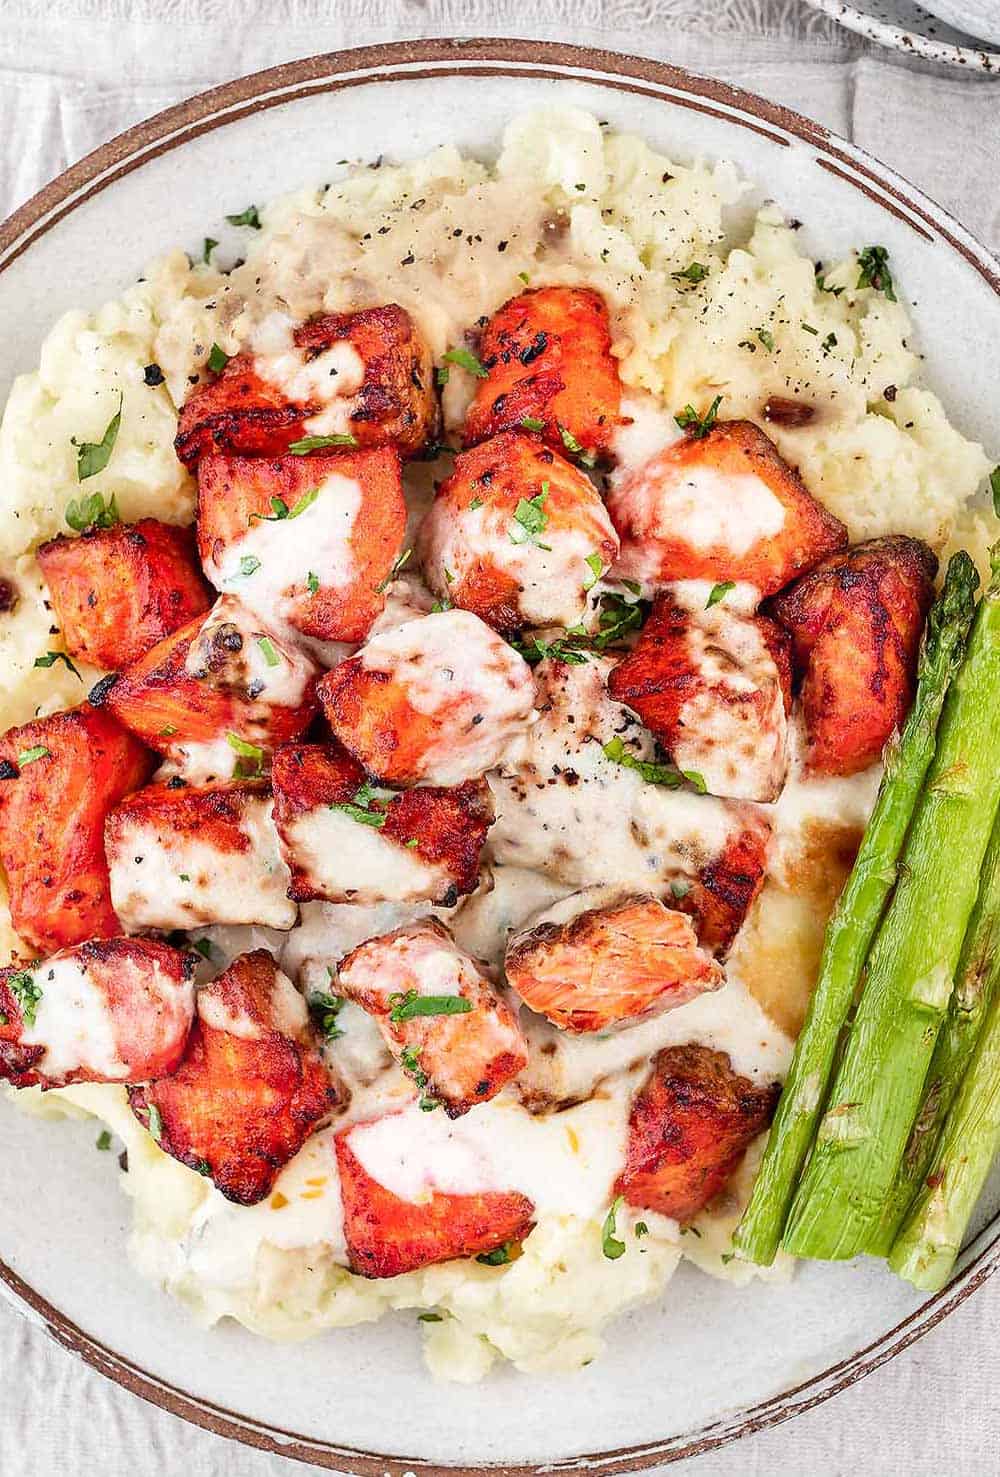 Air fryer salmon with creamy garlic sauce in a white bowl with mashed potatoes and asparagus.